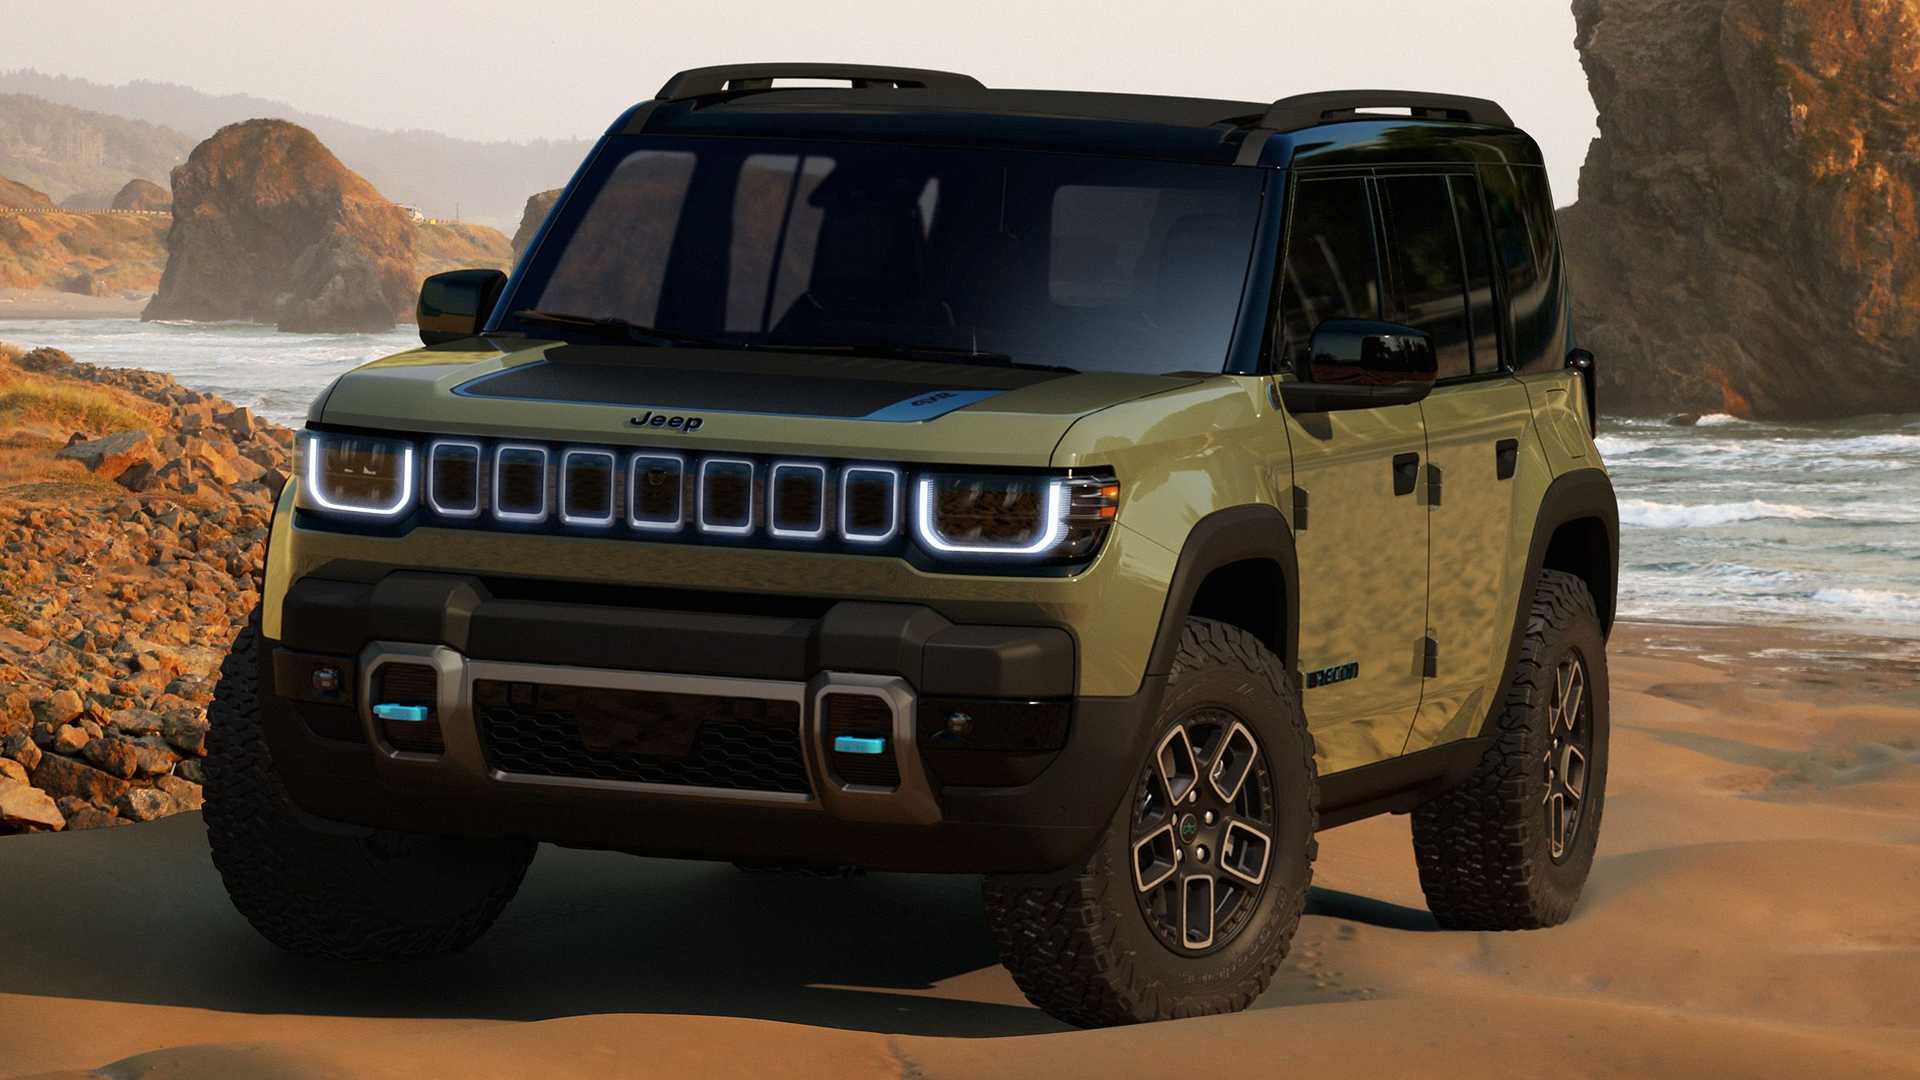 2024-jeep-recon-front-view-jpg.jpg